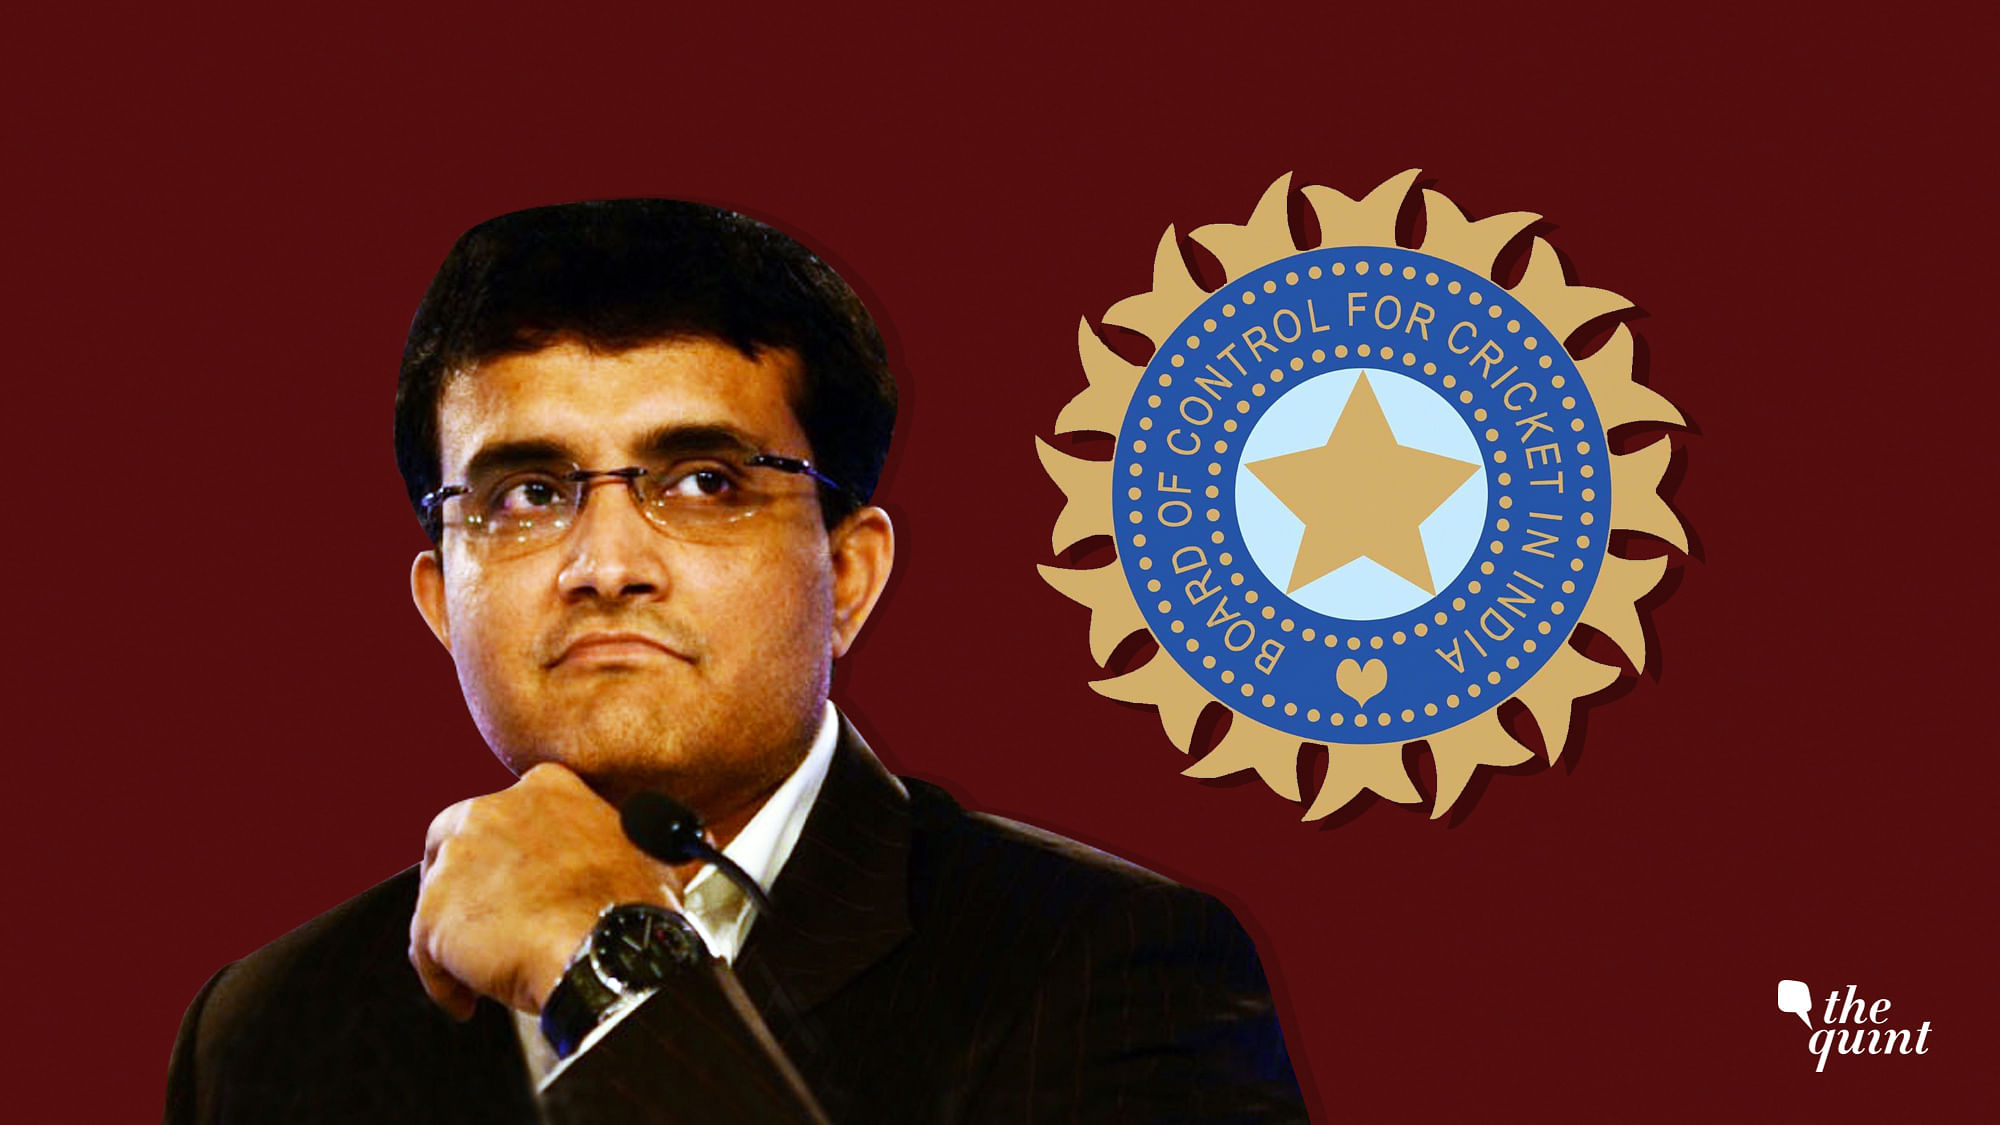 Sourav Ganguly score a scathing letter to the BCCI expressing her concerns about the way the board is being run.